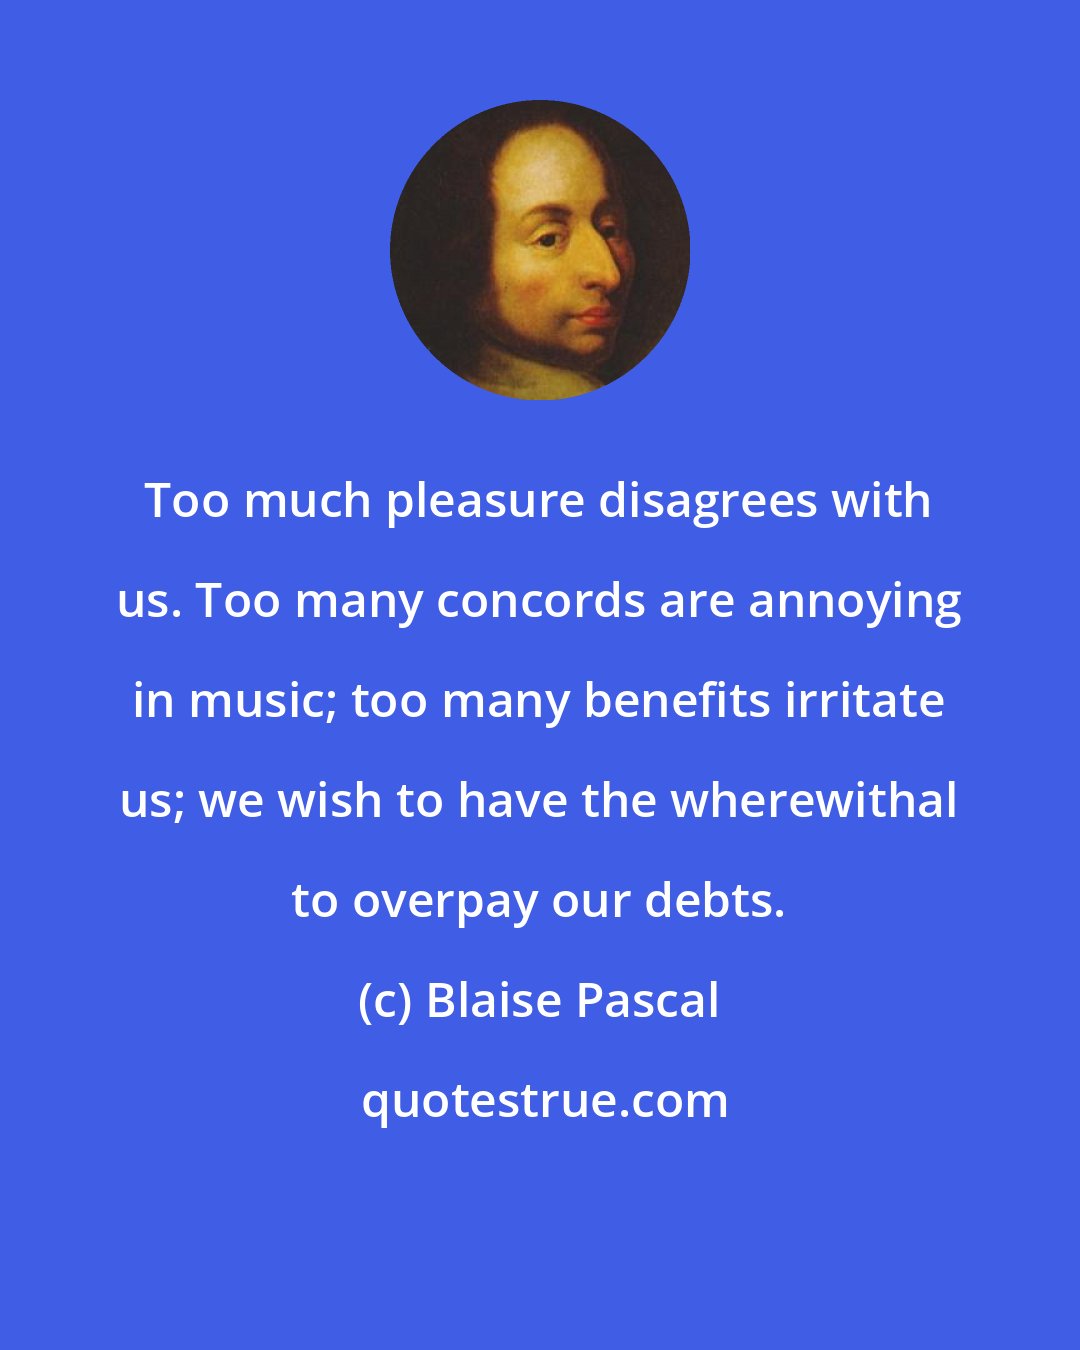 Blaise Pascal: Too much pleasure disagrees with us. Too many concords are annoying in music; too many benefits irritate us; we wish to have the wherewithal to overpay our debts.